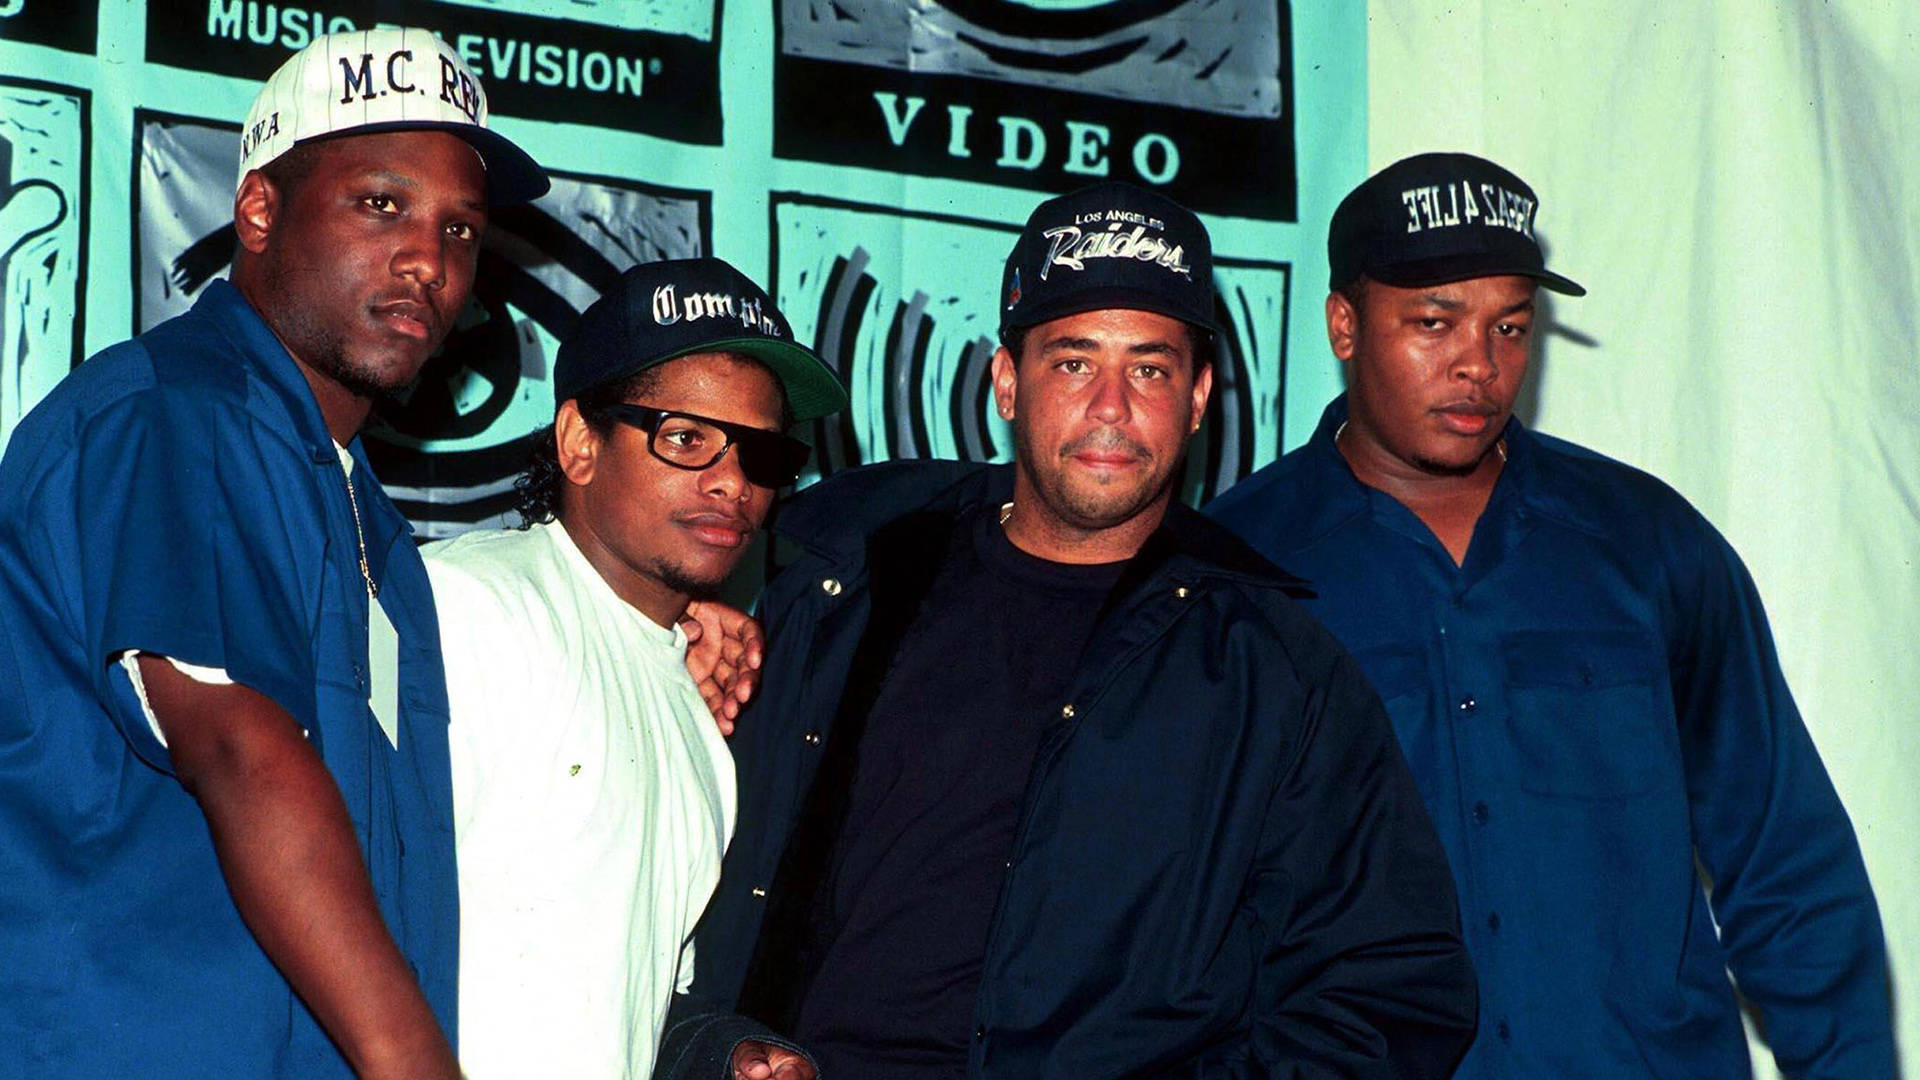 N.W.A. Rappers 1991 MTV Video Music Awards Wallpaper